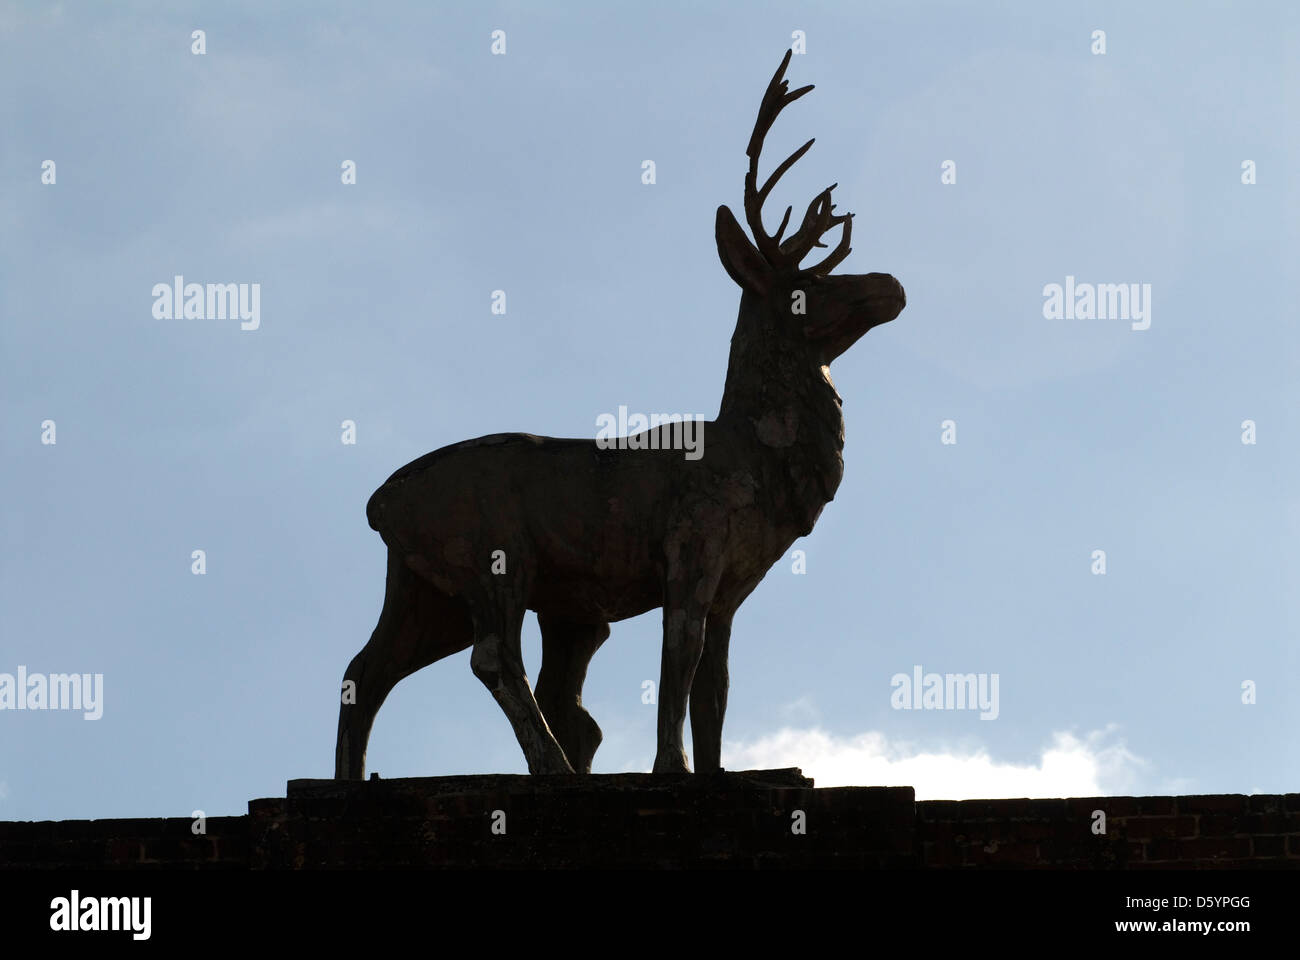 Stag sculpture on top of the Deer Park Stag Gate. The Drax estate  Charborough Park, village of Winterbourne Zelston, Dorset UK. The Stag is noted for its 5th leg. This in fact is a tree stump that gives extra strength to the sculpture. HOMER SYKES Stock Photo